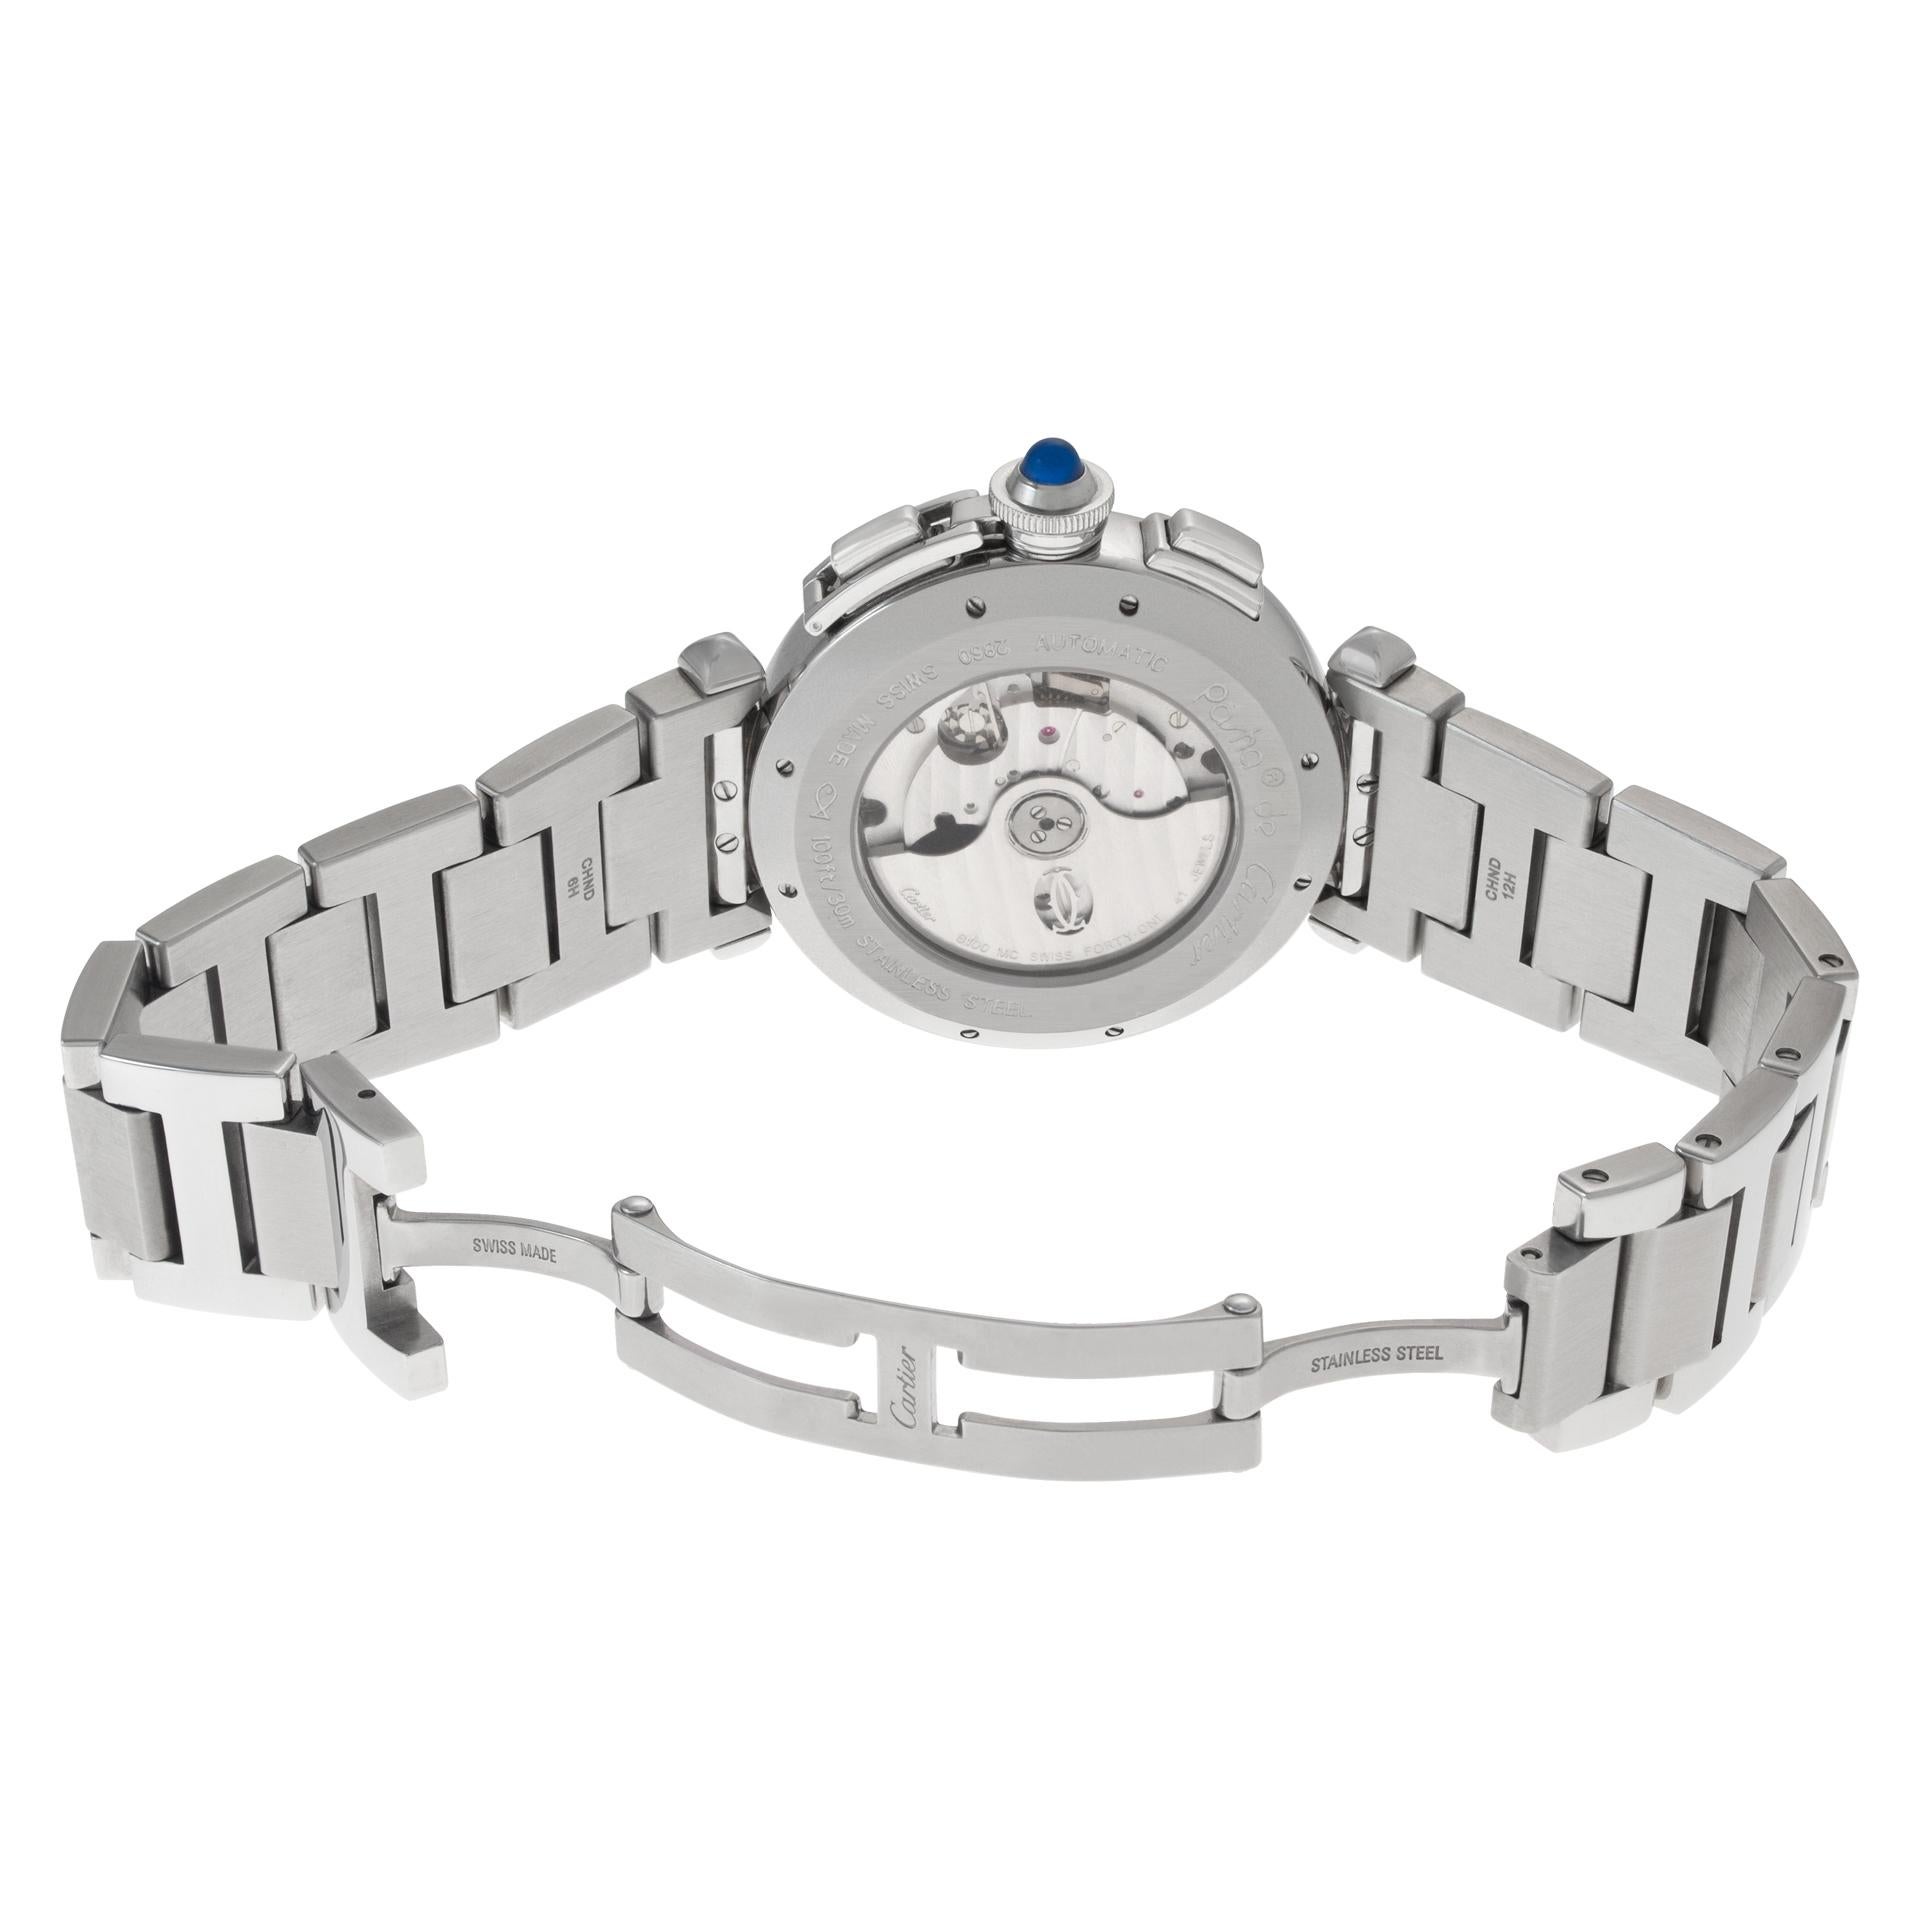 Women's or Men's Cartier Pasha in Stainless Steel, Chronograph, Ref W31085M7 